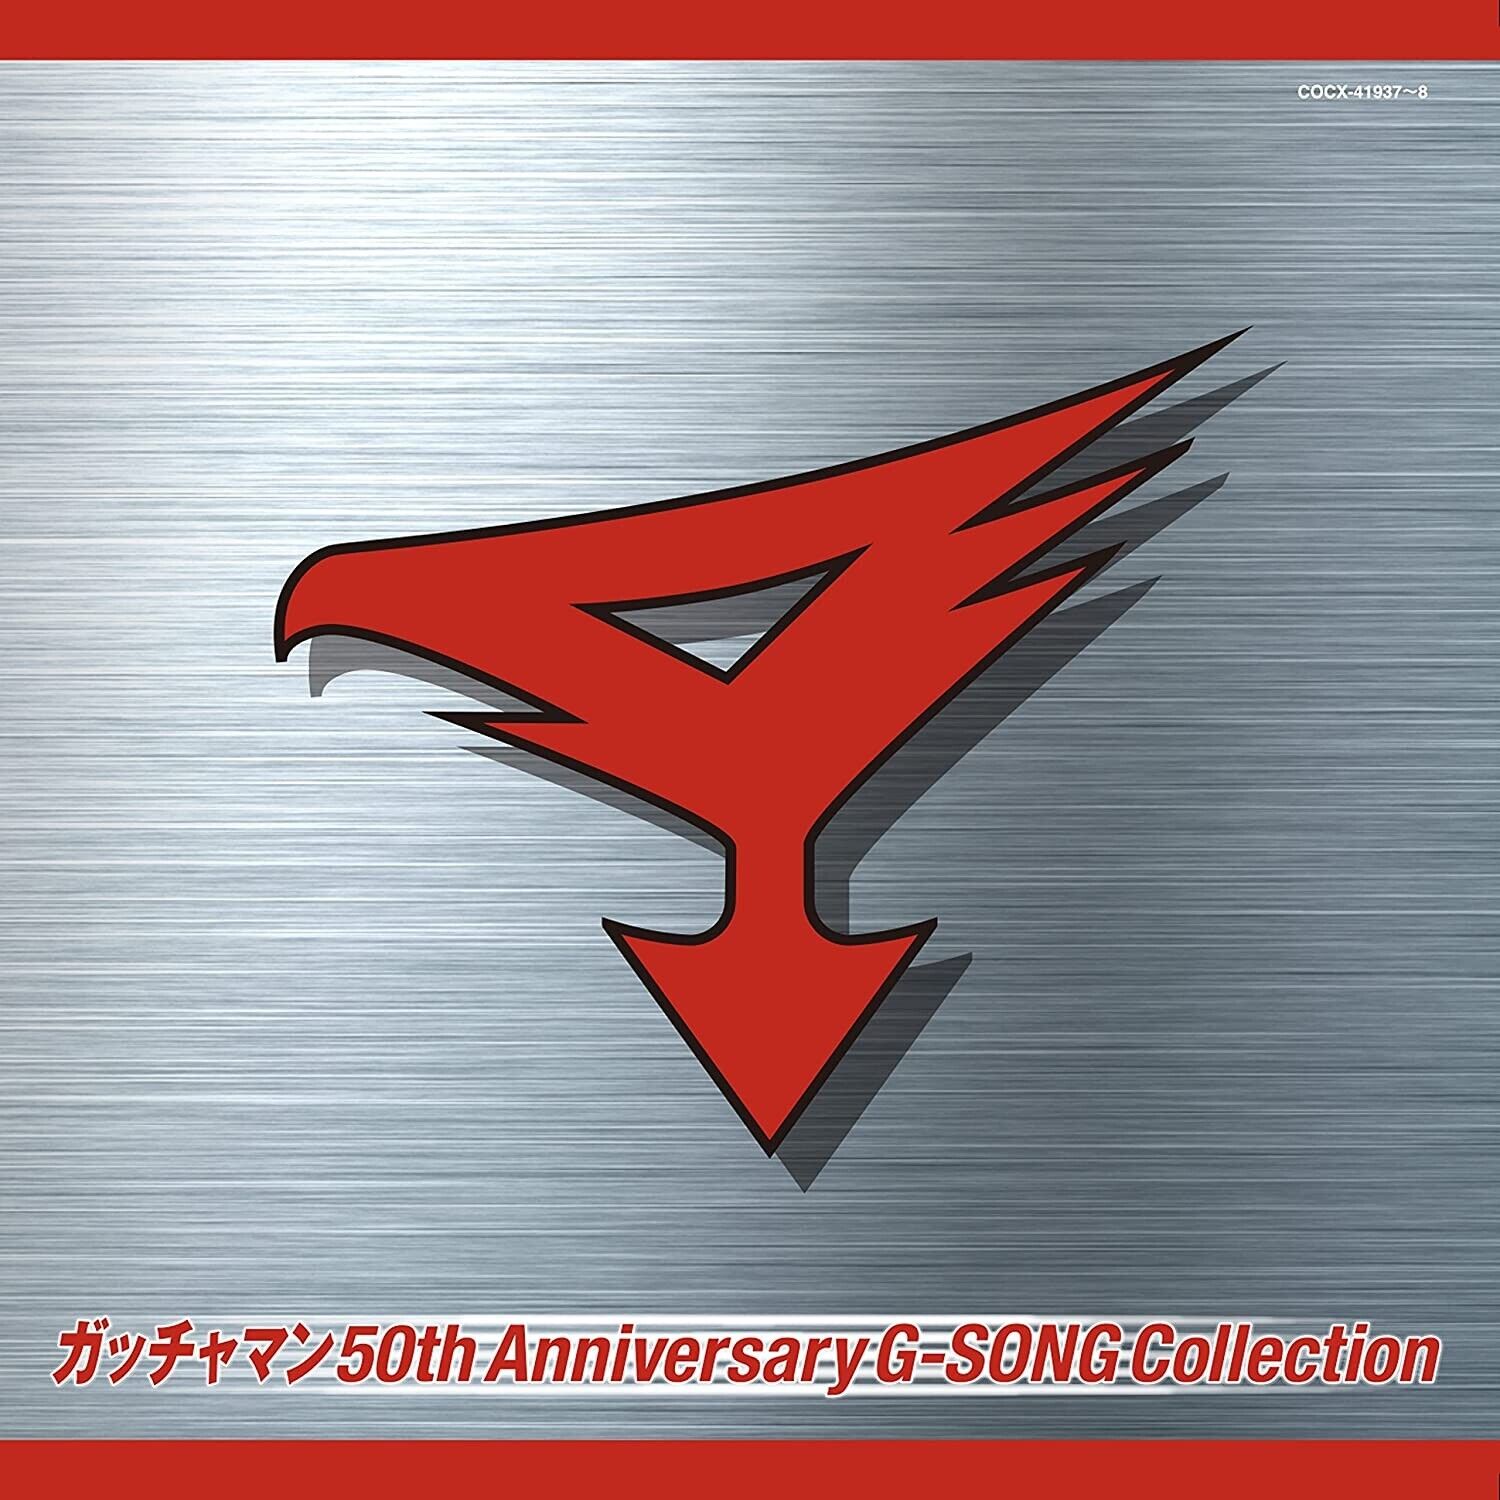 [CD] Gatchaman 50th Anniversary G-SONG Collection